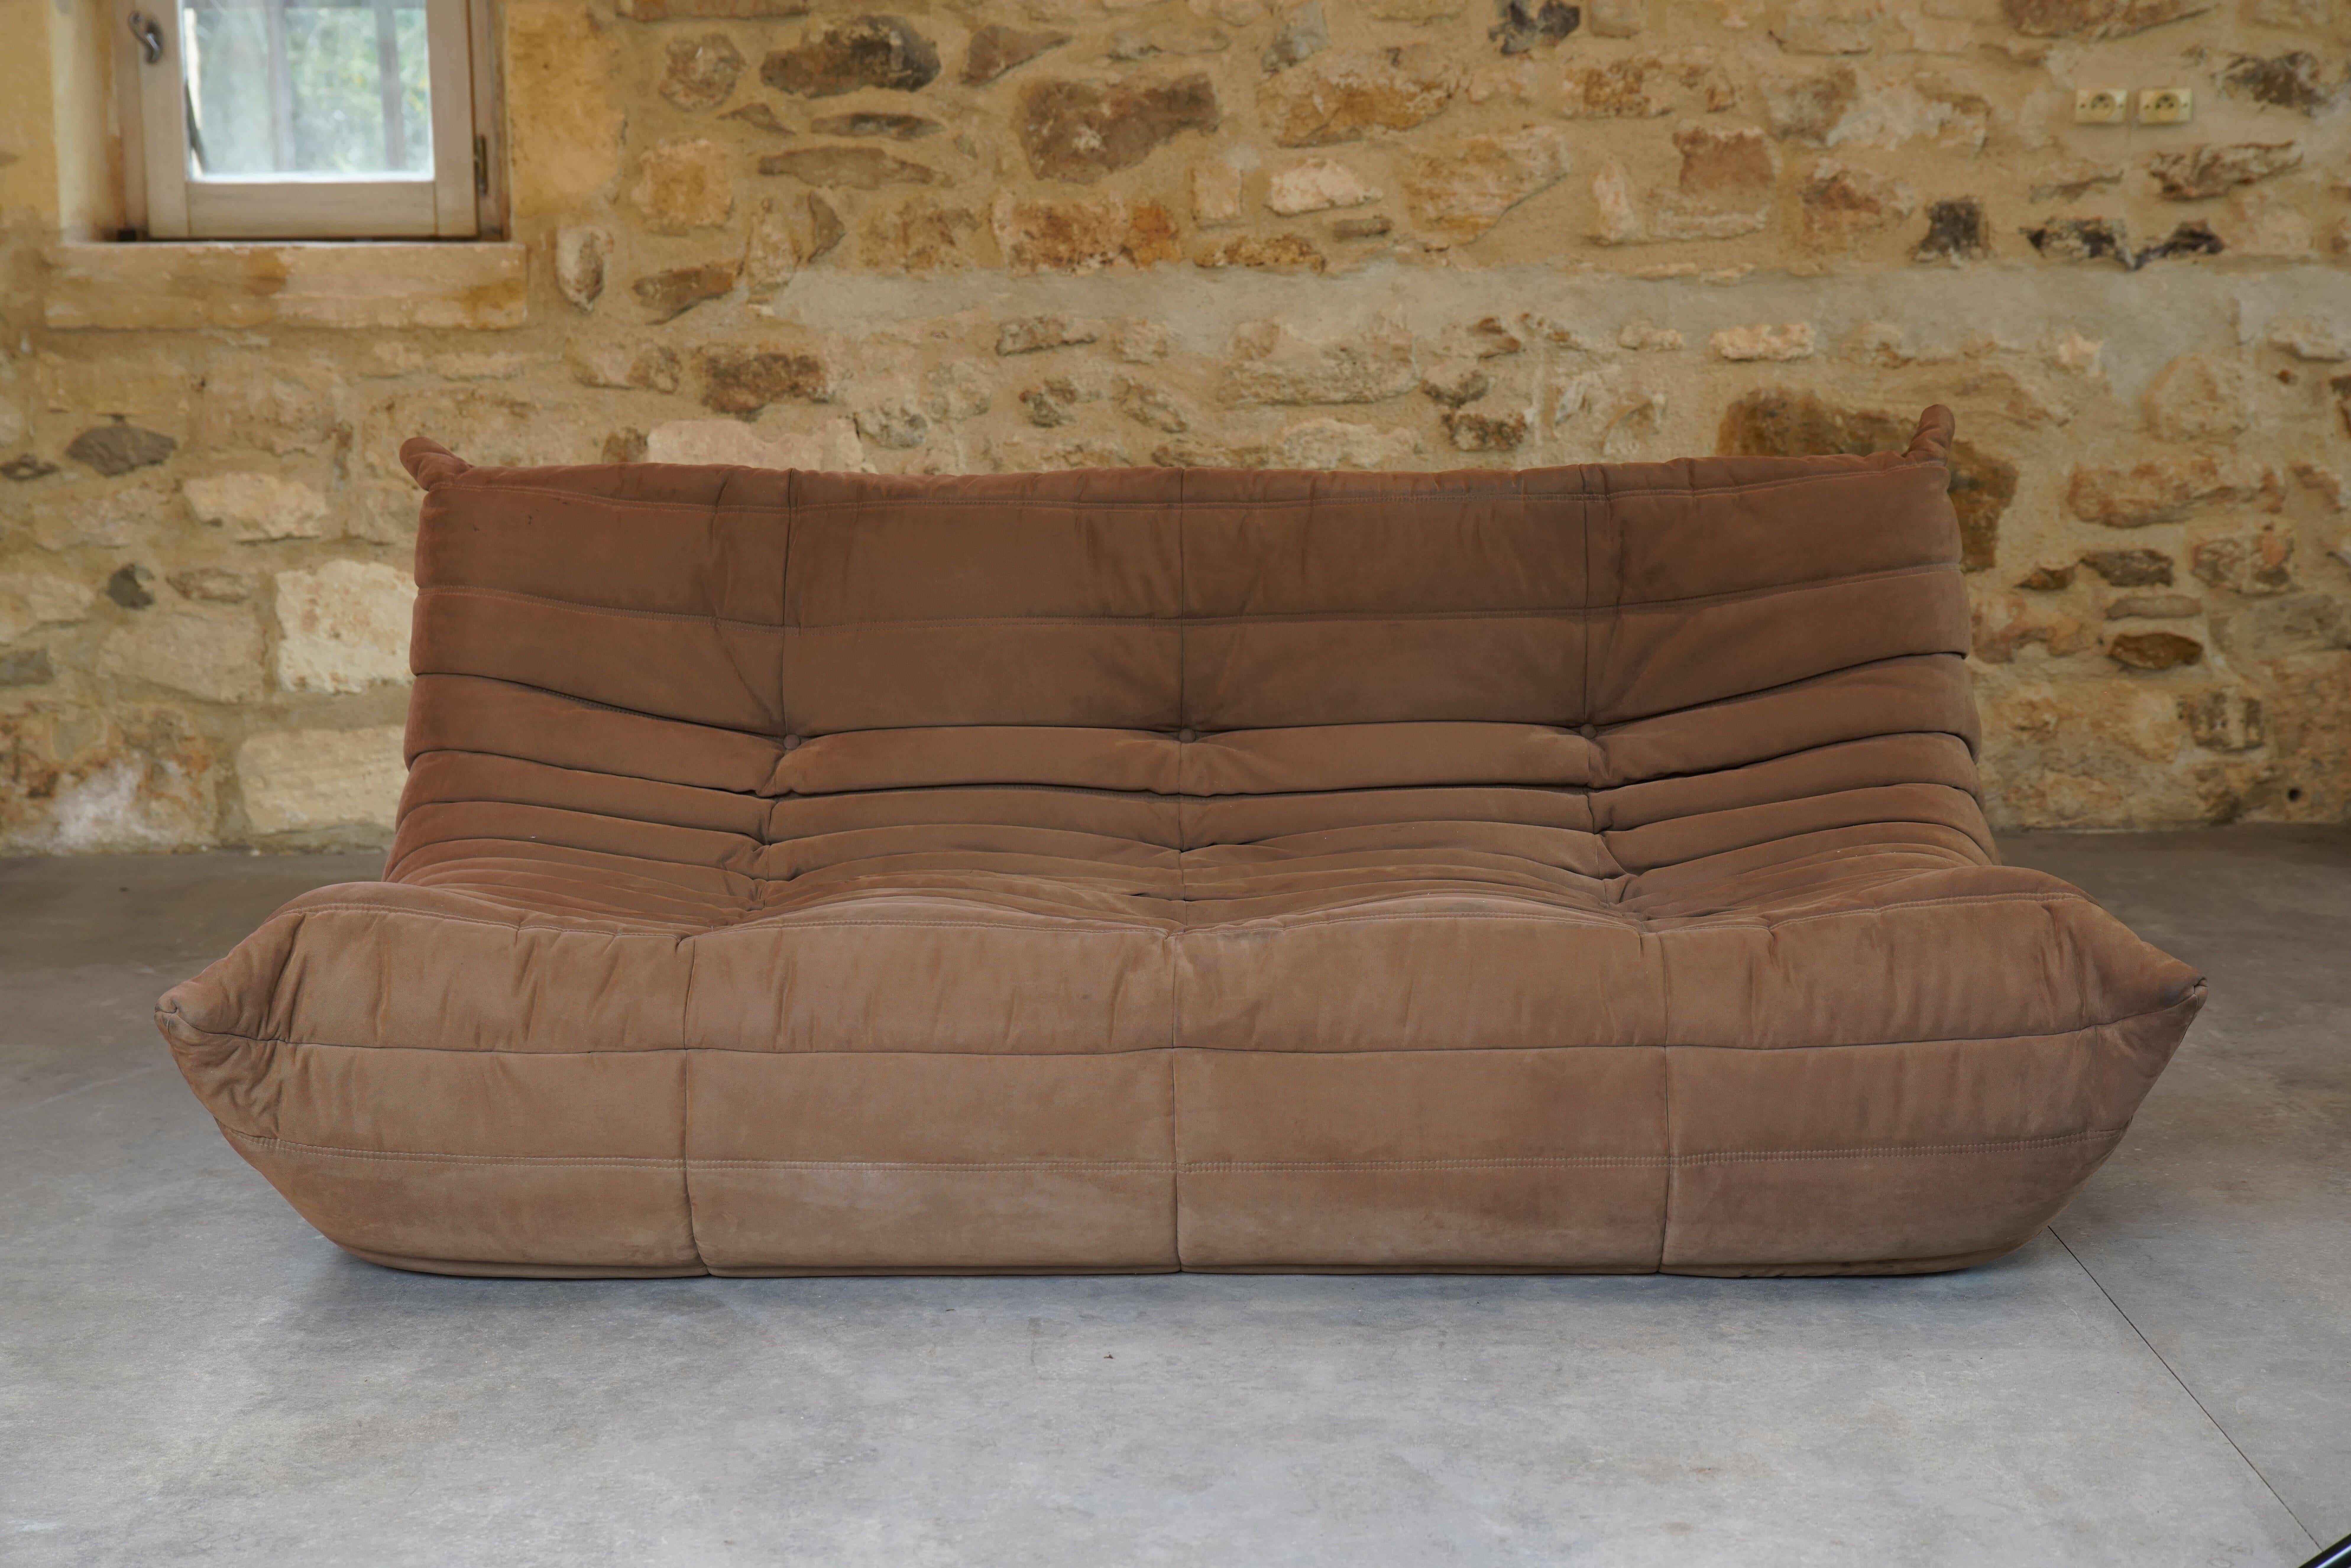 Beautiful 3-seater Togo sofa in brown cotton designed by Michel Ducaroy for Ligne Roset from 2007.

Designer Michel Ducaroy drew inspiration for the Togo's design from an aluminum toothpaste tube noticing it “folded back on itself like a stovepipe